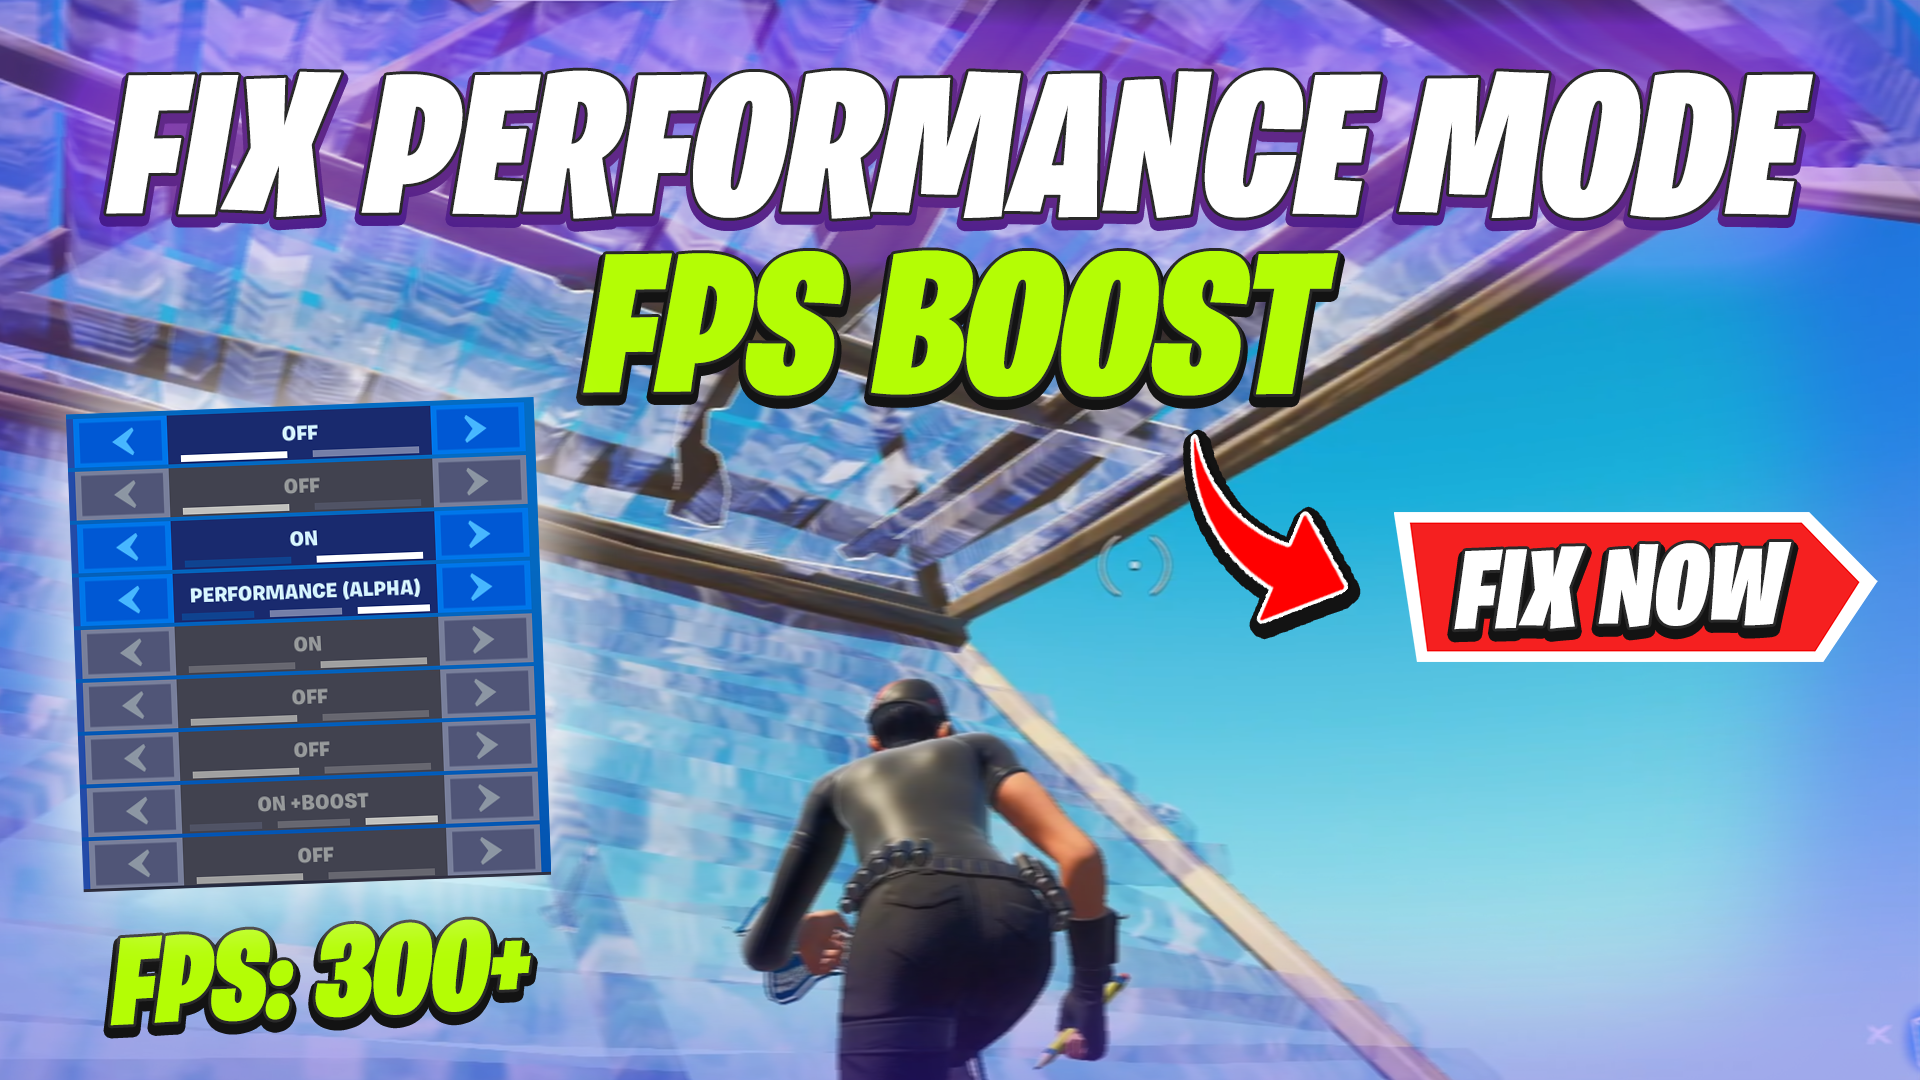 How To Fix Performance Mode In Fortnite Performance Mode (Boost FPS)